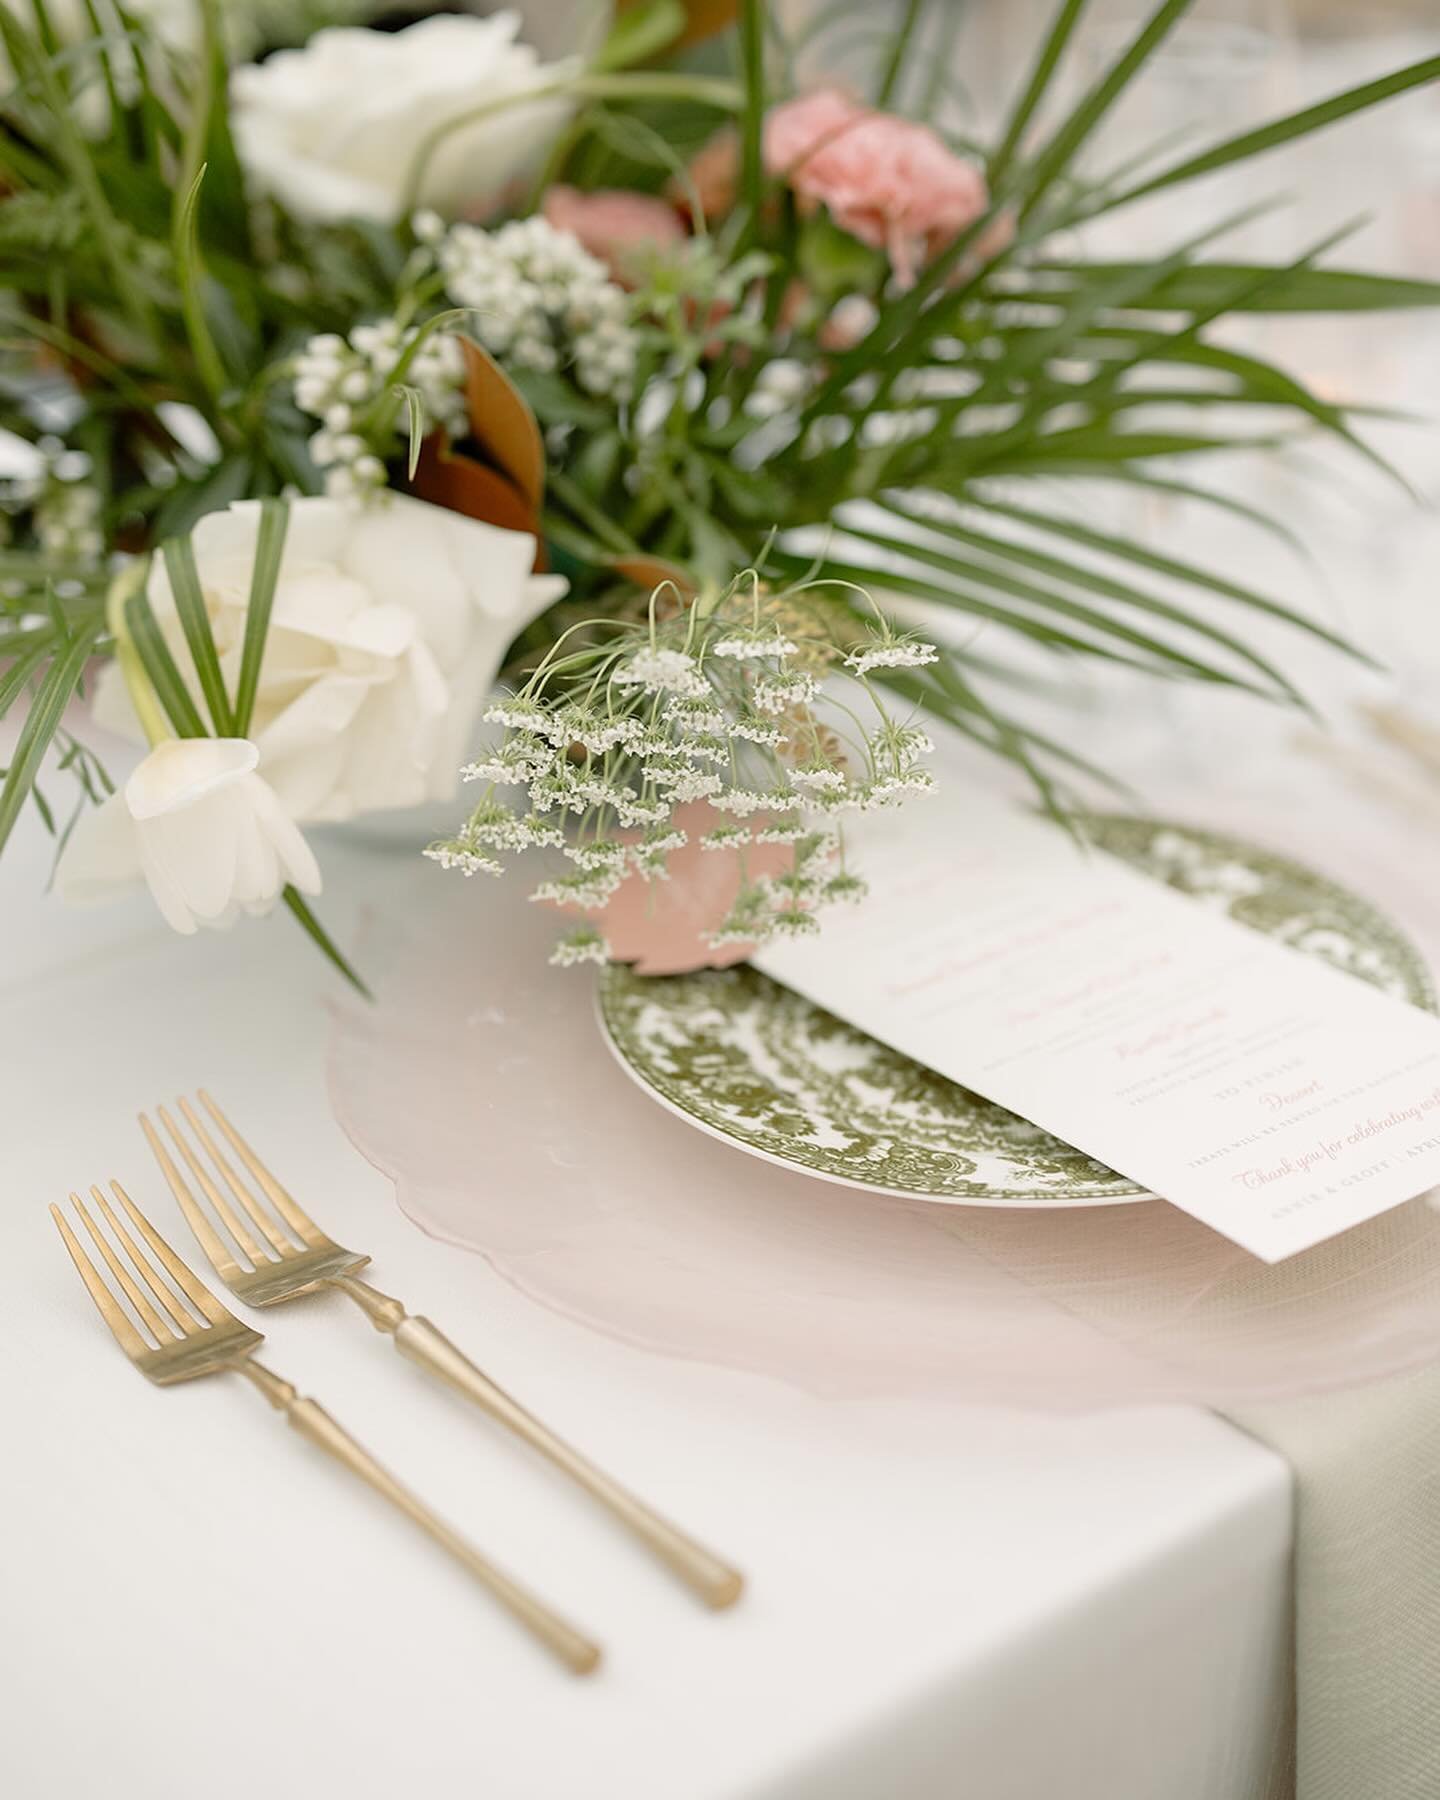 obsessed with the soft and subtle pops of pink peeking through on A + G&rsquo;s tablescape 

@janelleputrich 
@petalandpeachfloral 
@gibbesmuseumevents 
@curatedeventscharleston 
@littleblackdresspaperie 
@studio.ack 

#weddingreception #tablescape #